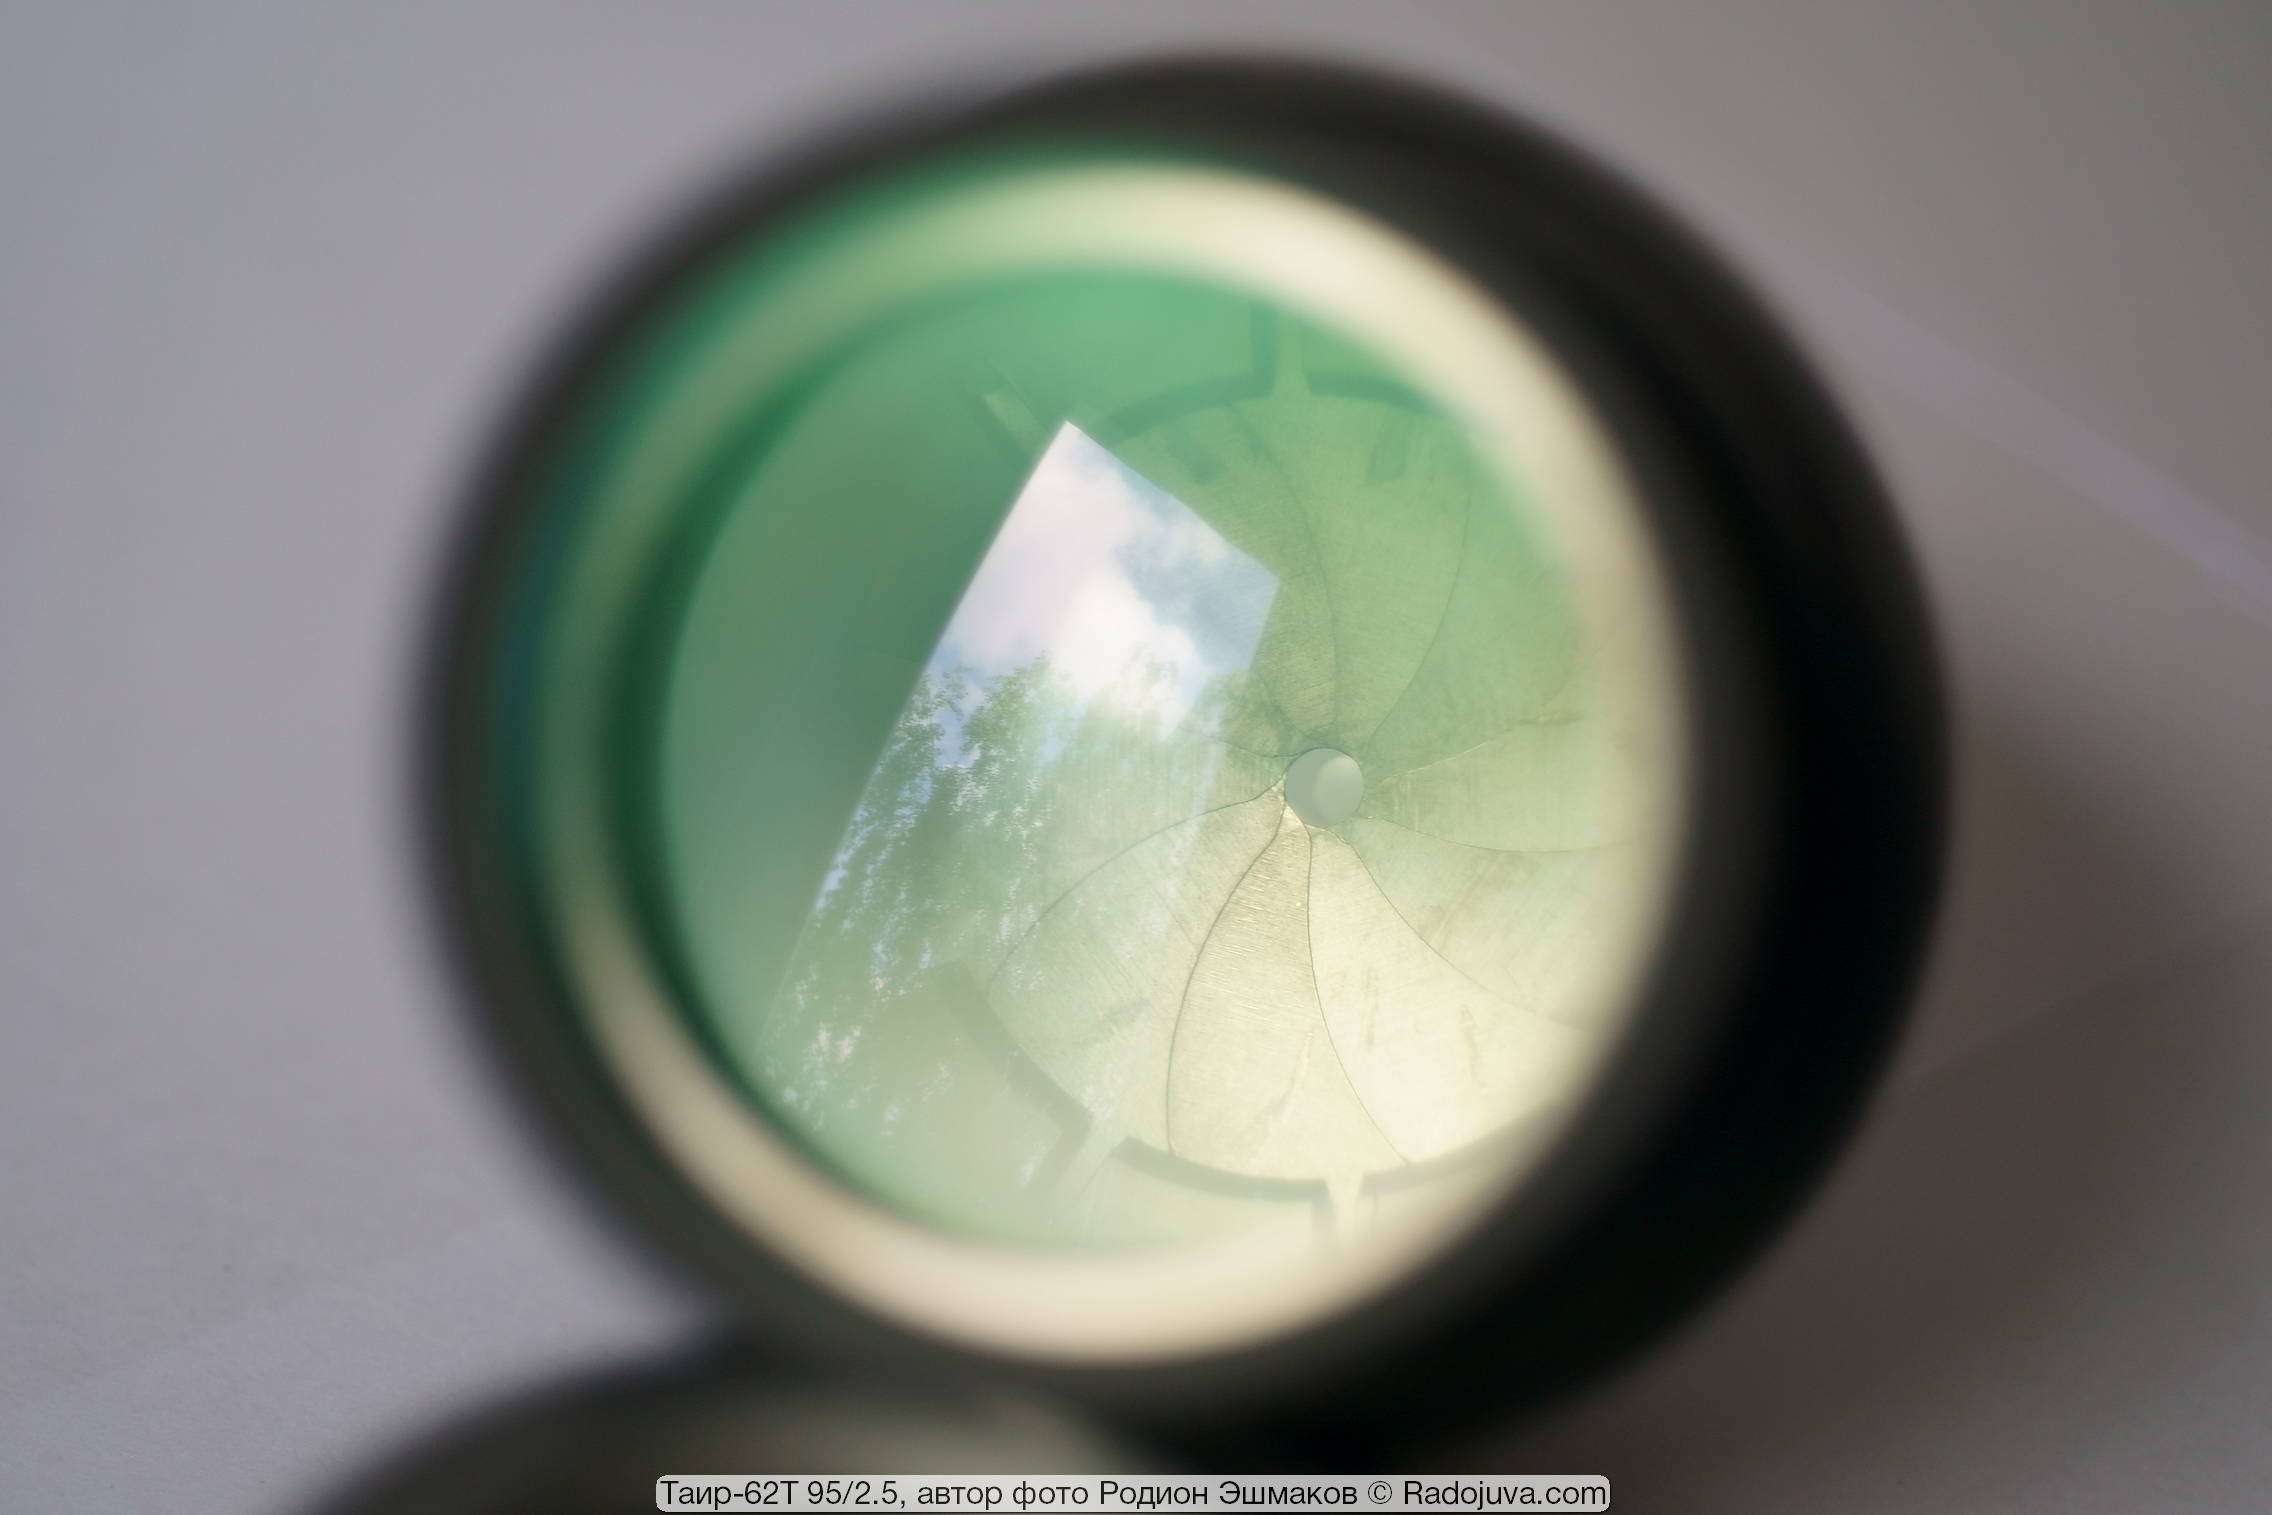 View of the diaphragm and lens flare of the front lens.